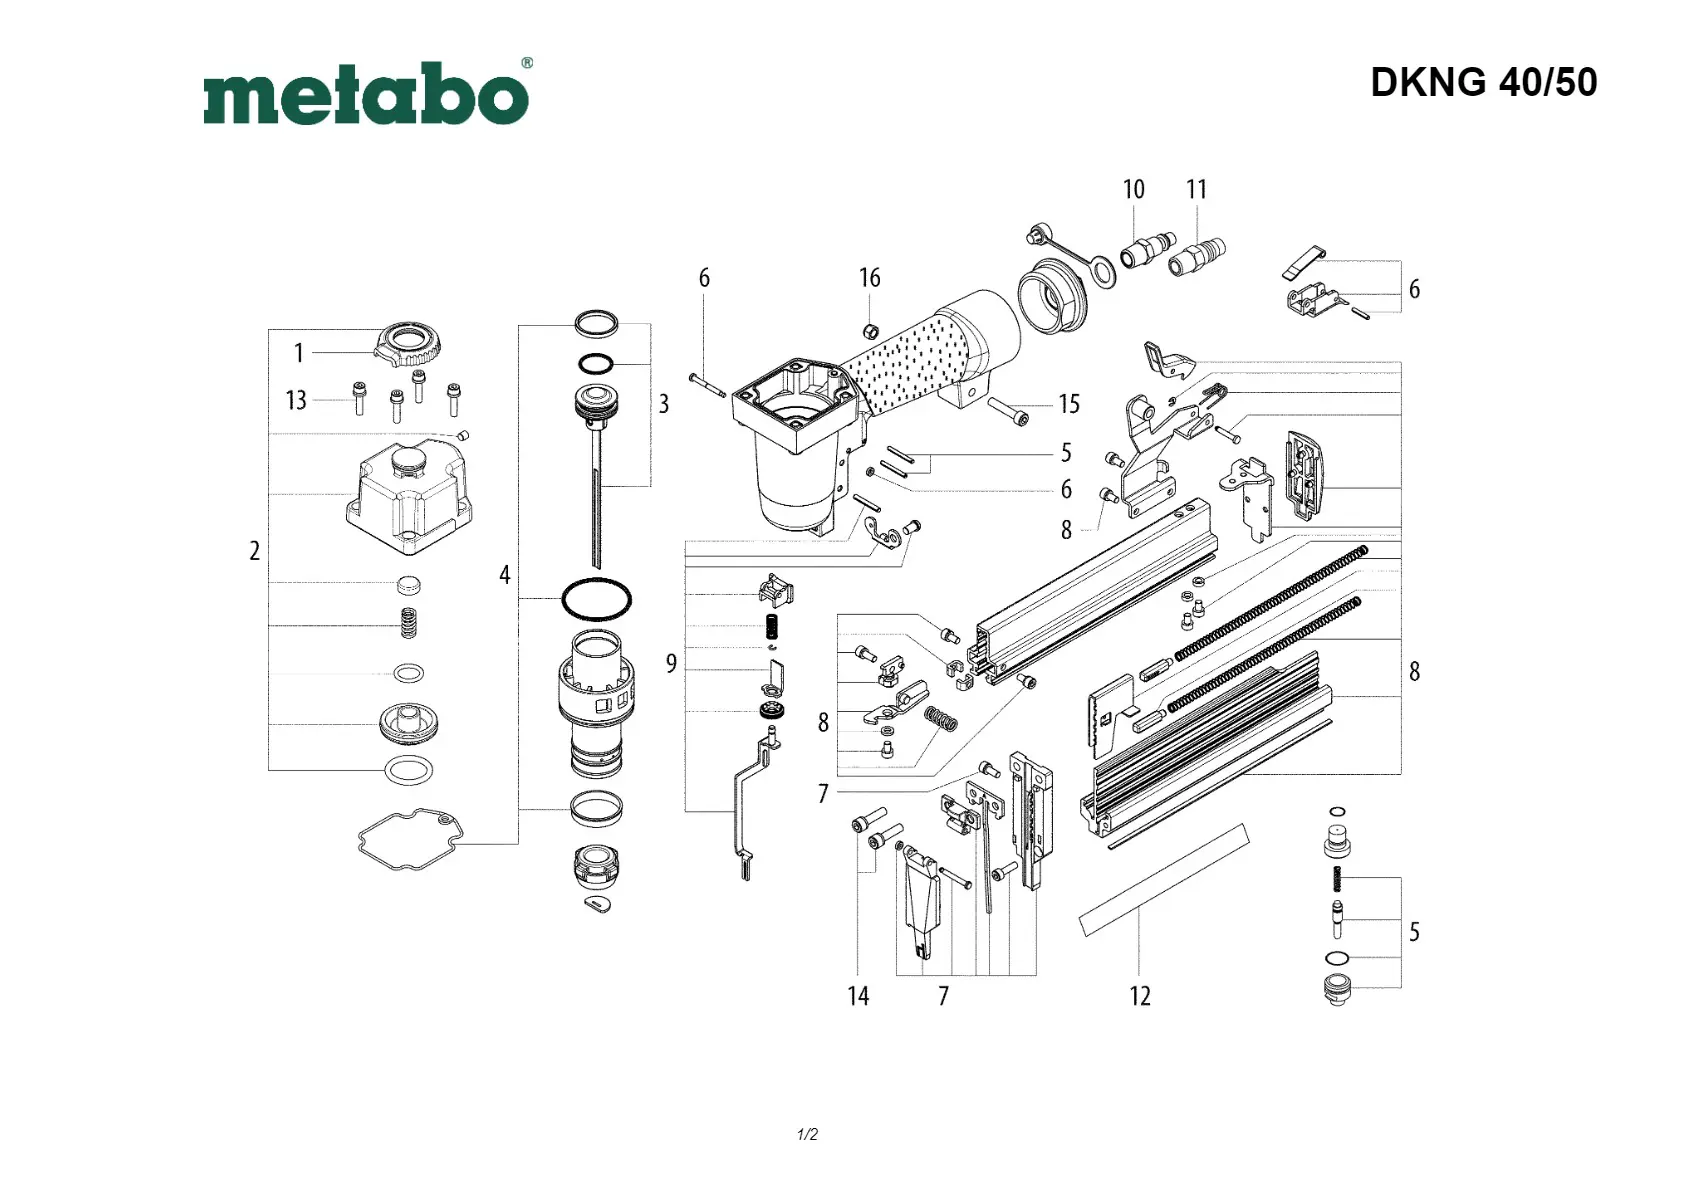 Metabo Tripping device compl.